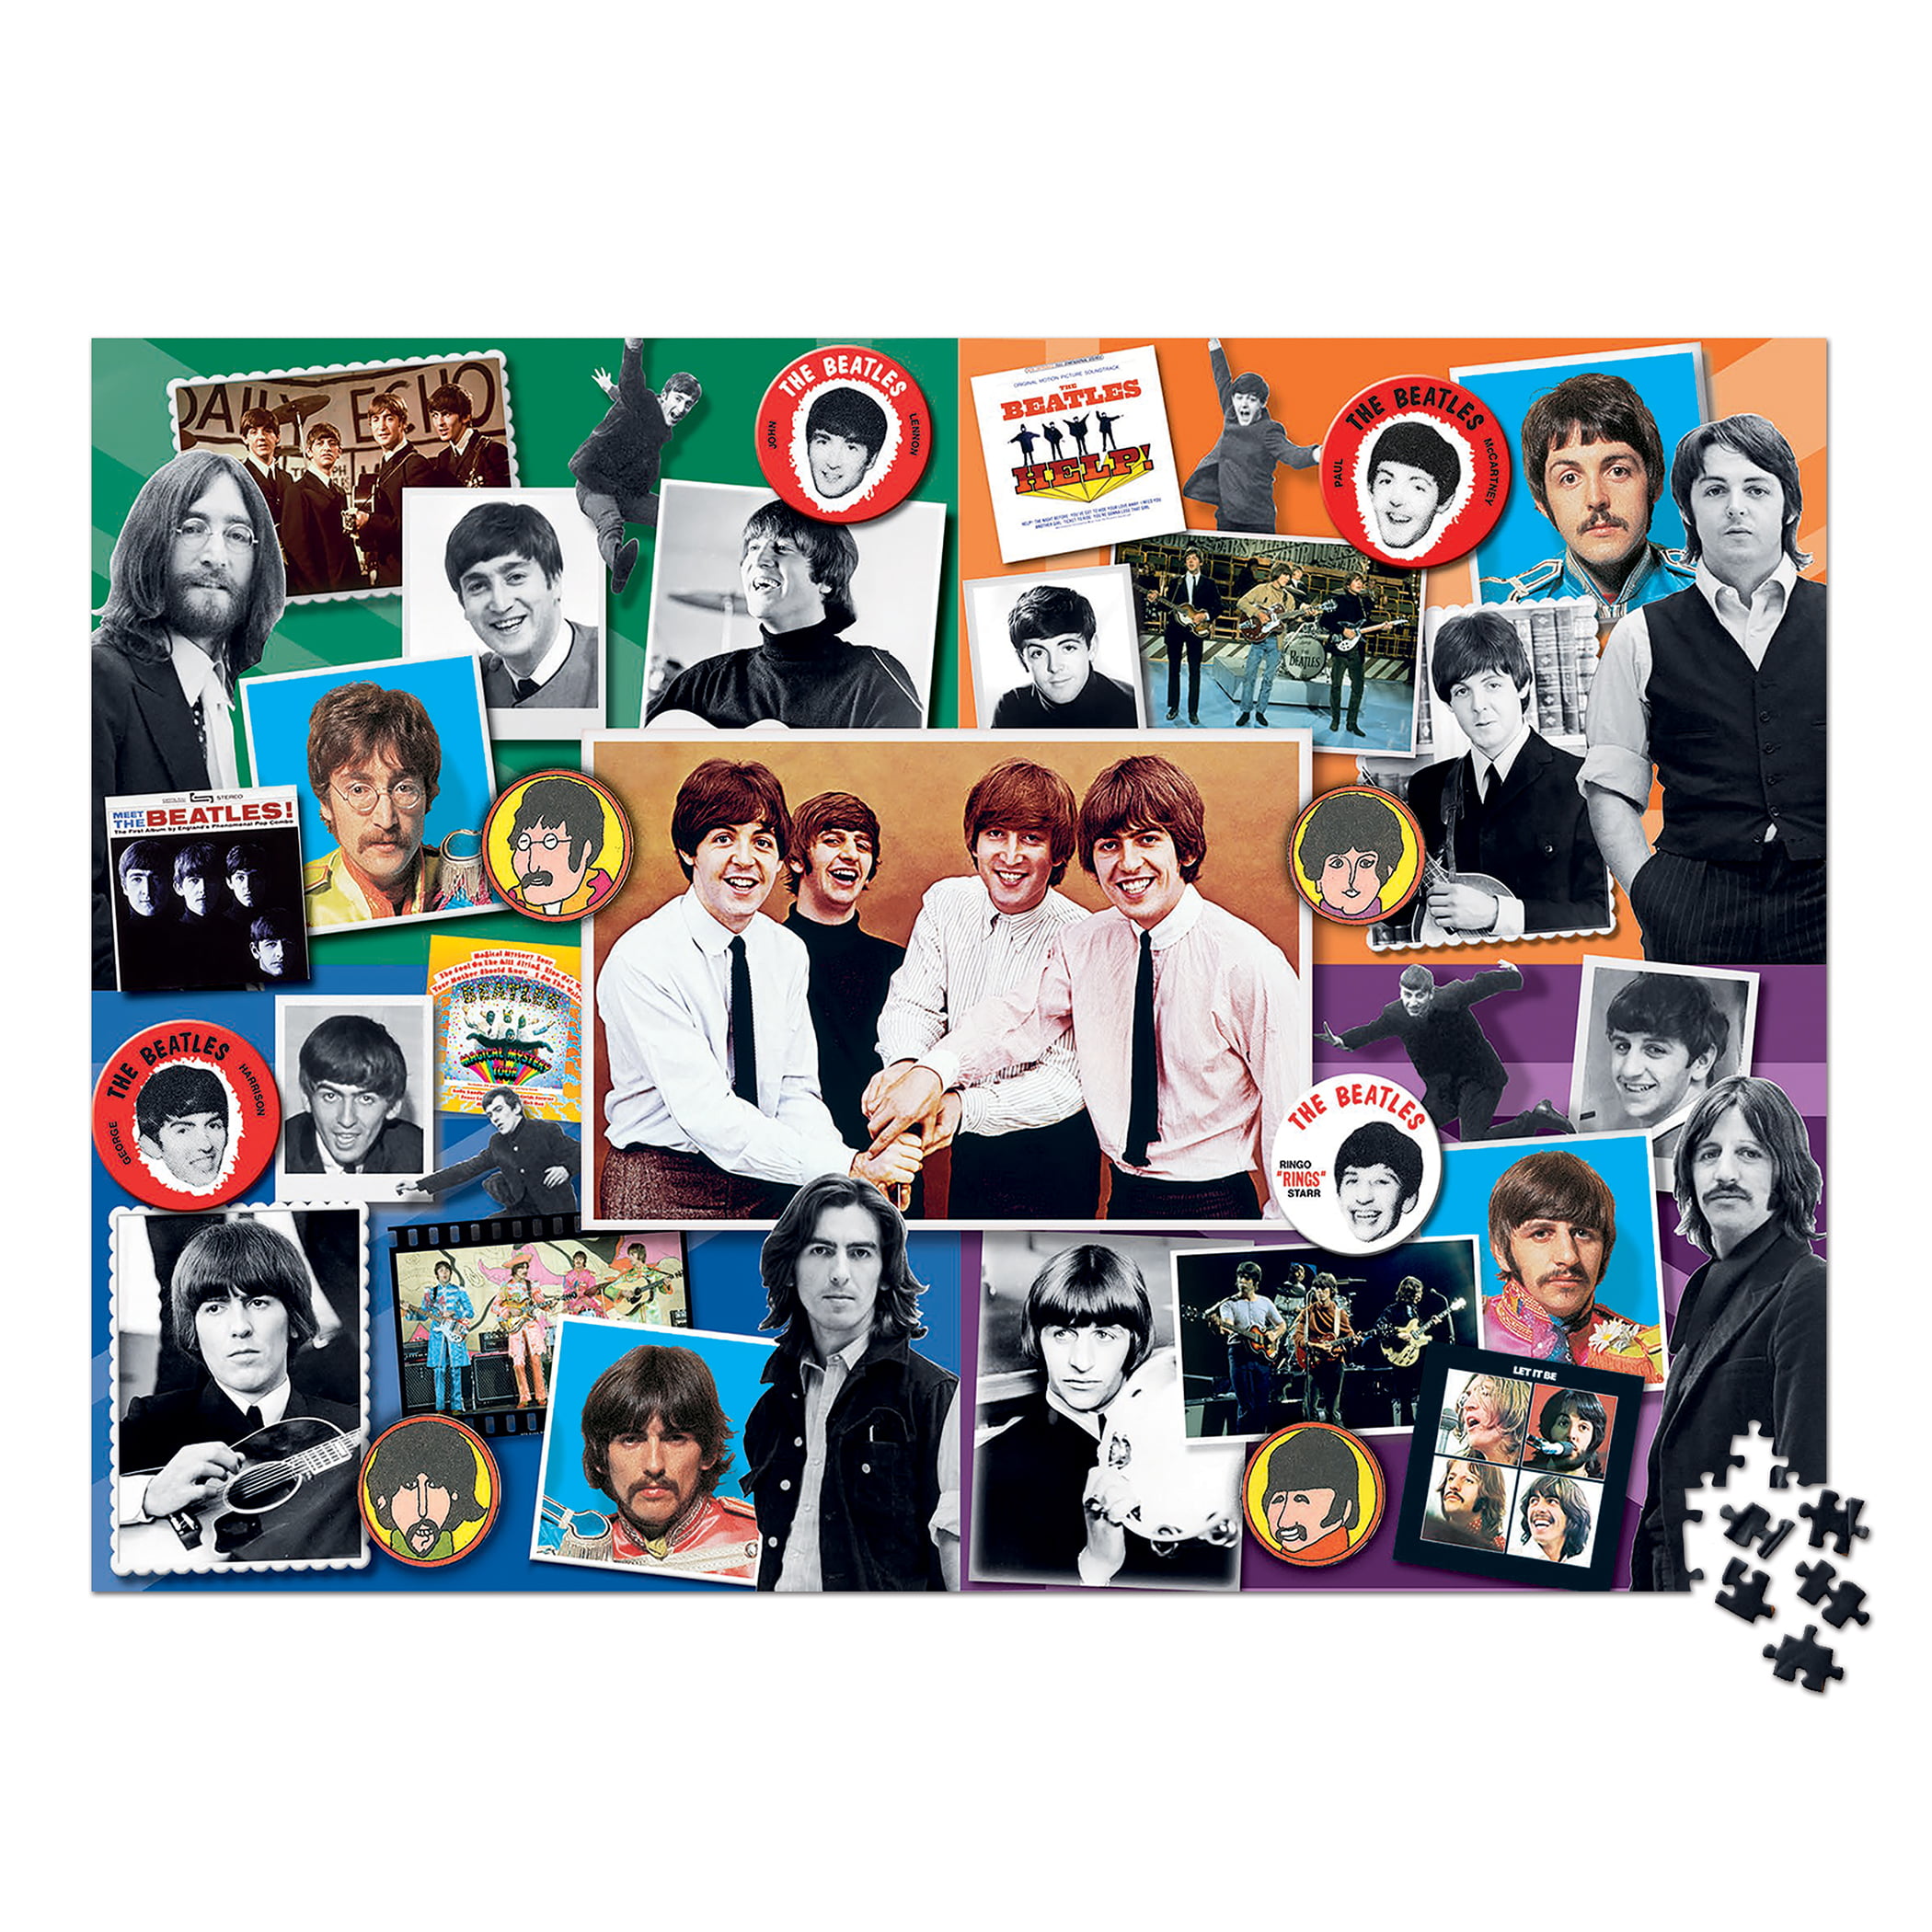 The Beatles Collage 1,000-Piece Jigsaw Puzzle